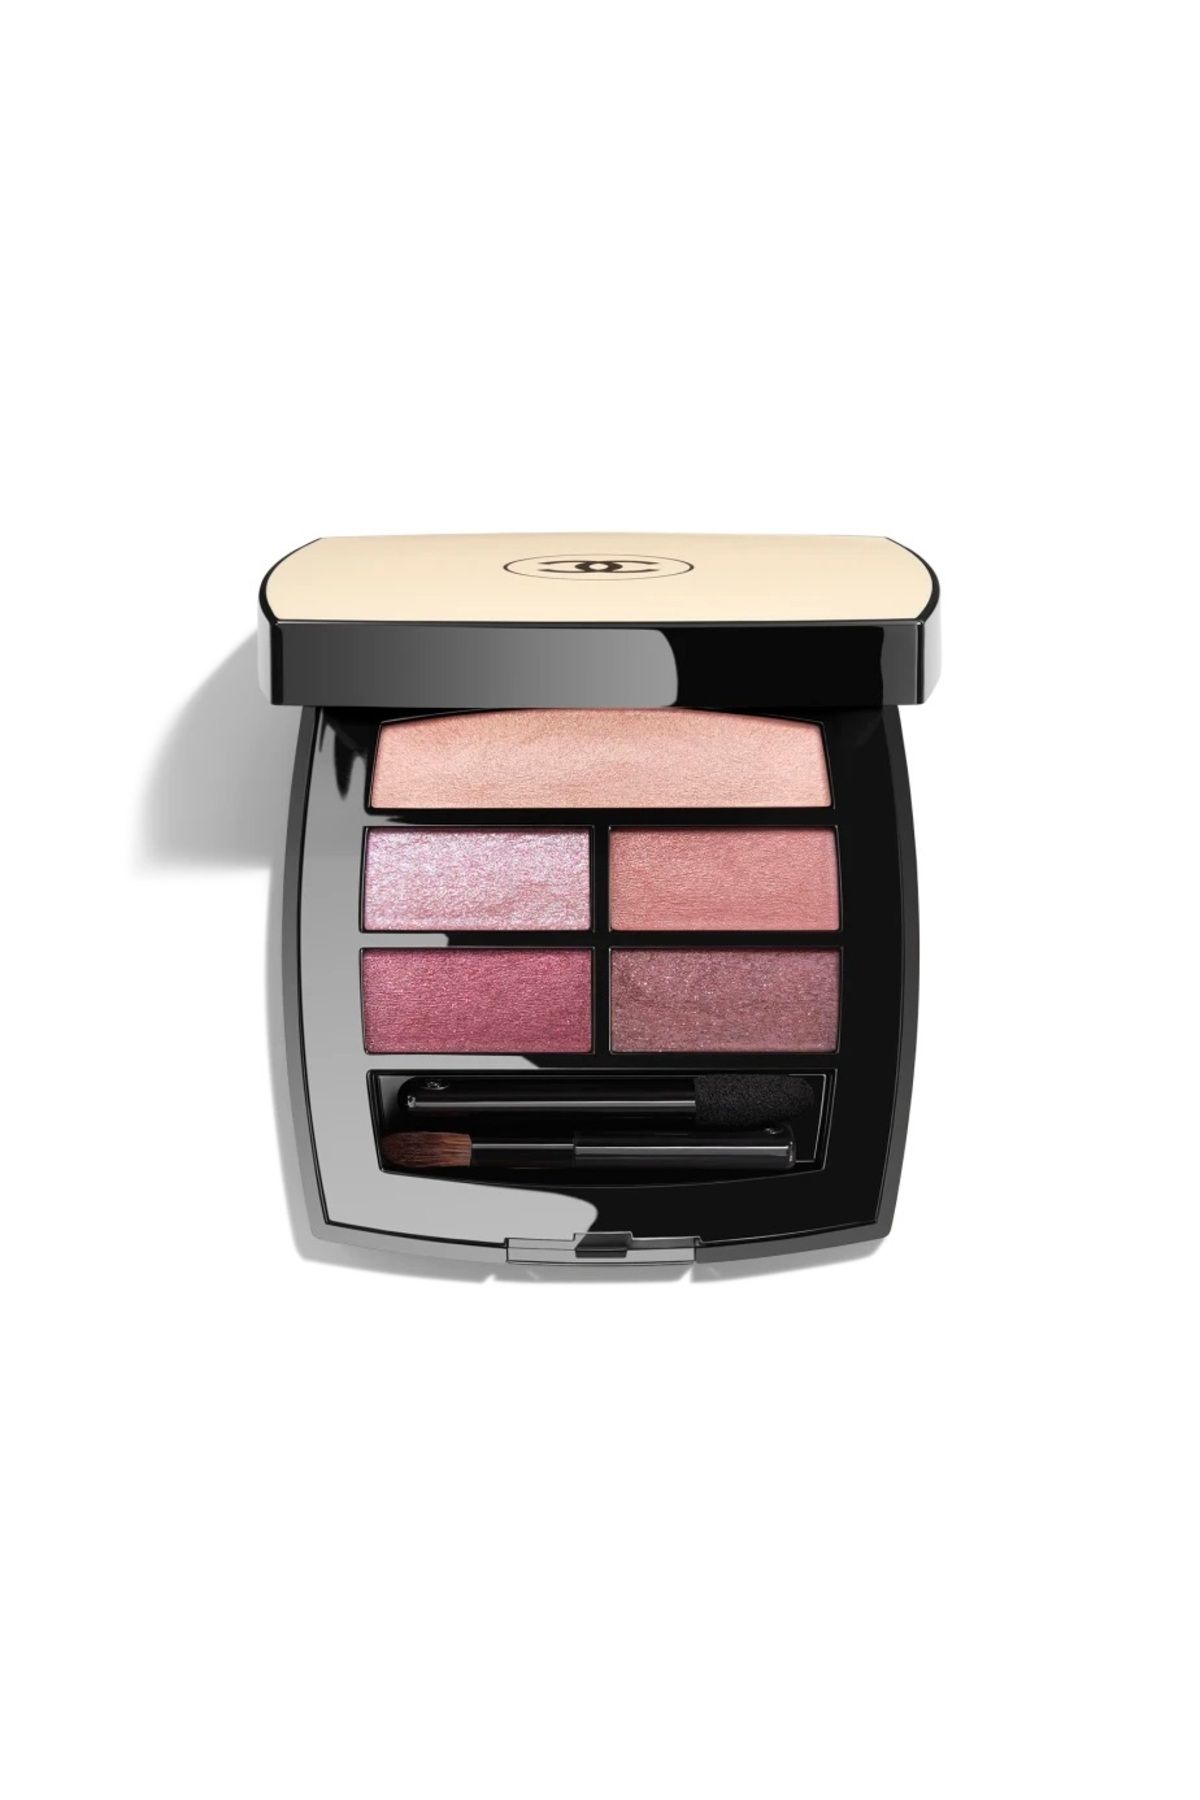 Chanel LES BEIGES EYESHADOW PALETTE - COOL